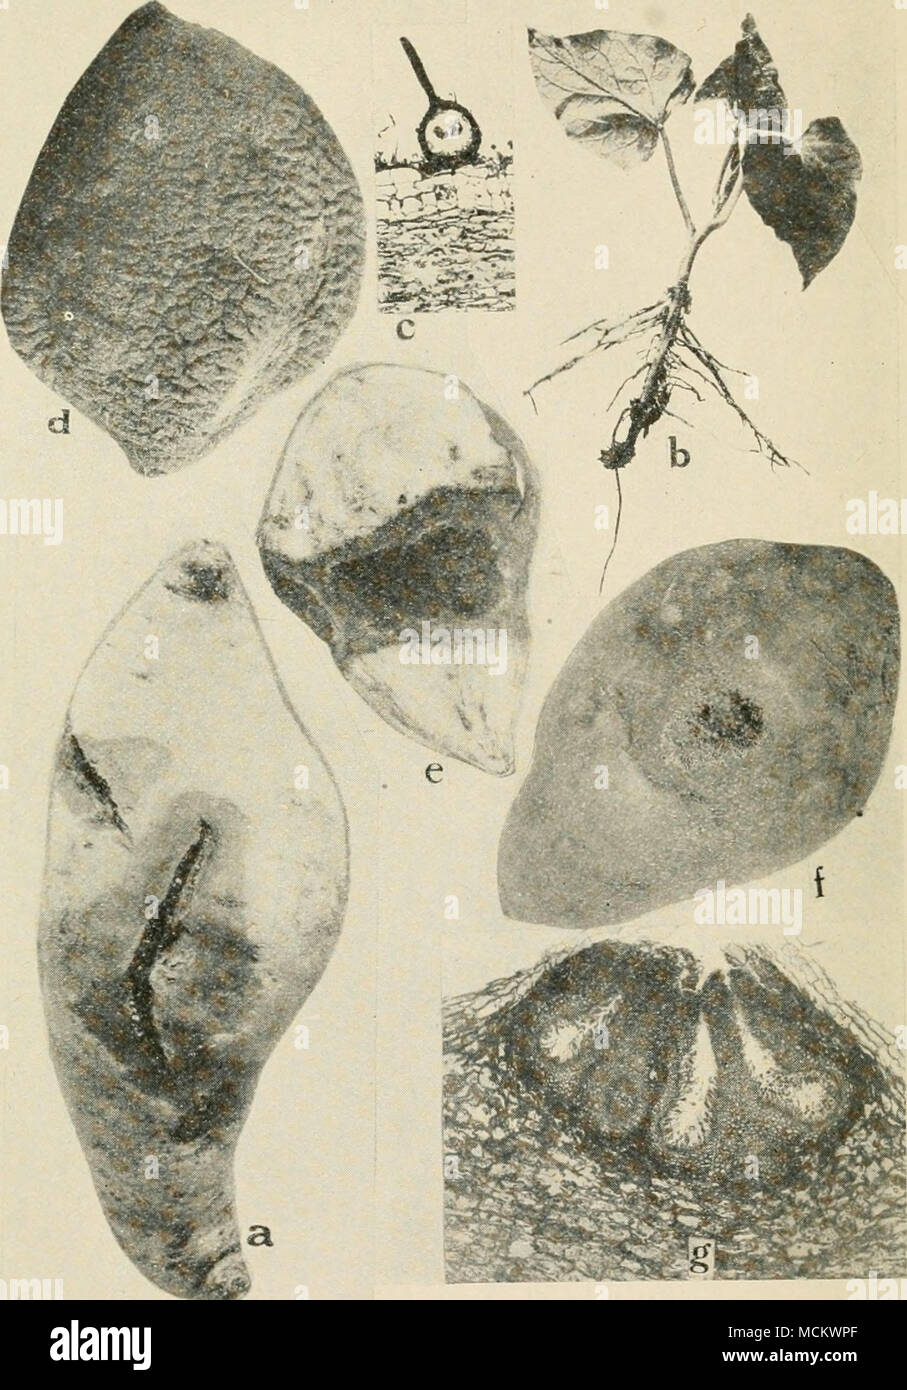 . Fig. 26. Sweet Potato Diseases. a. Black rot at place of a bruise, 6. black shank, f. showing a pycnidium of the black rot fungus, d. dry rot, e. cross section through /, to show the effect of the disease on the root, f. Java black rot surface view, showing strings of spores oozing out from the center of spot, g. cross section through diseased sweet potato root to show pycnidia of the fungus Diplodia tubericola. Stock Photo